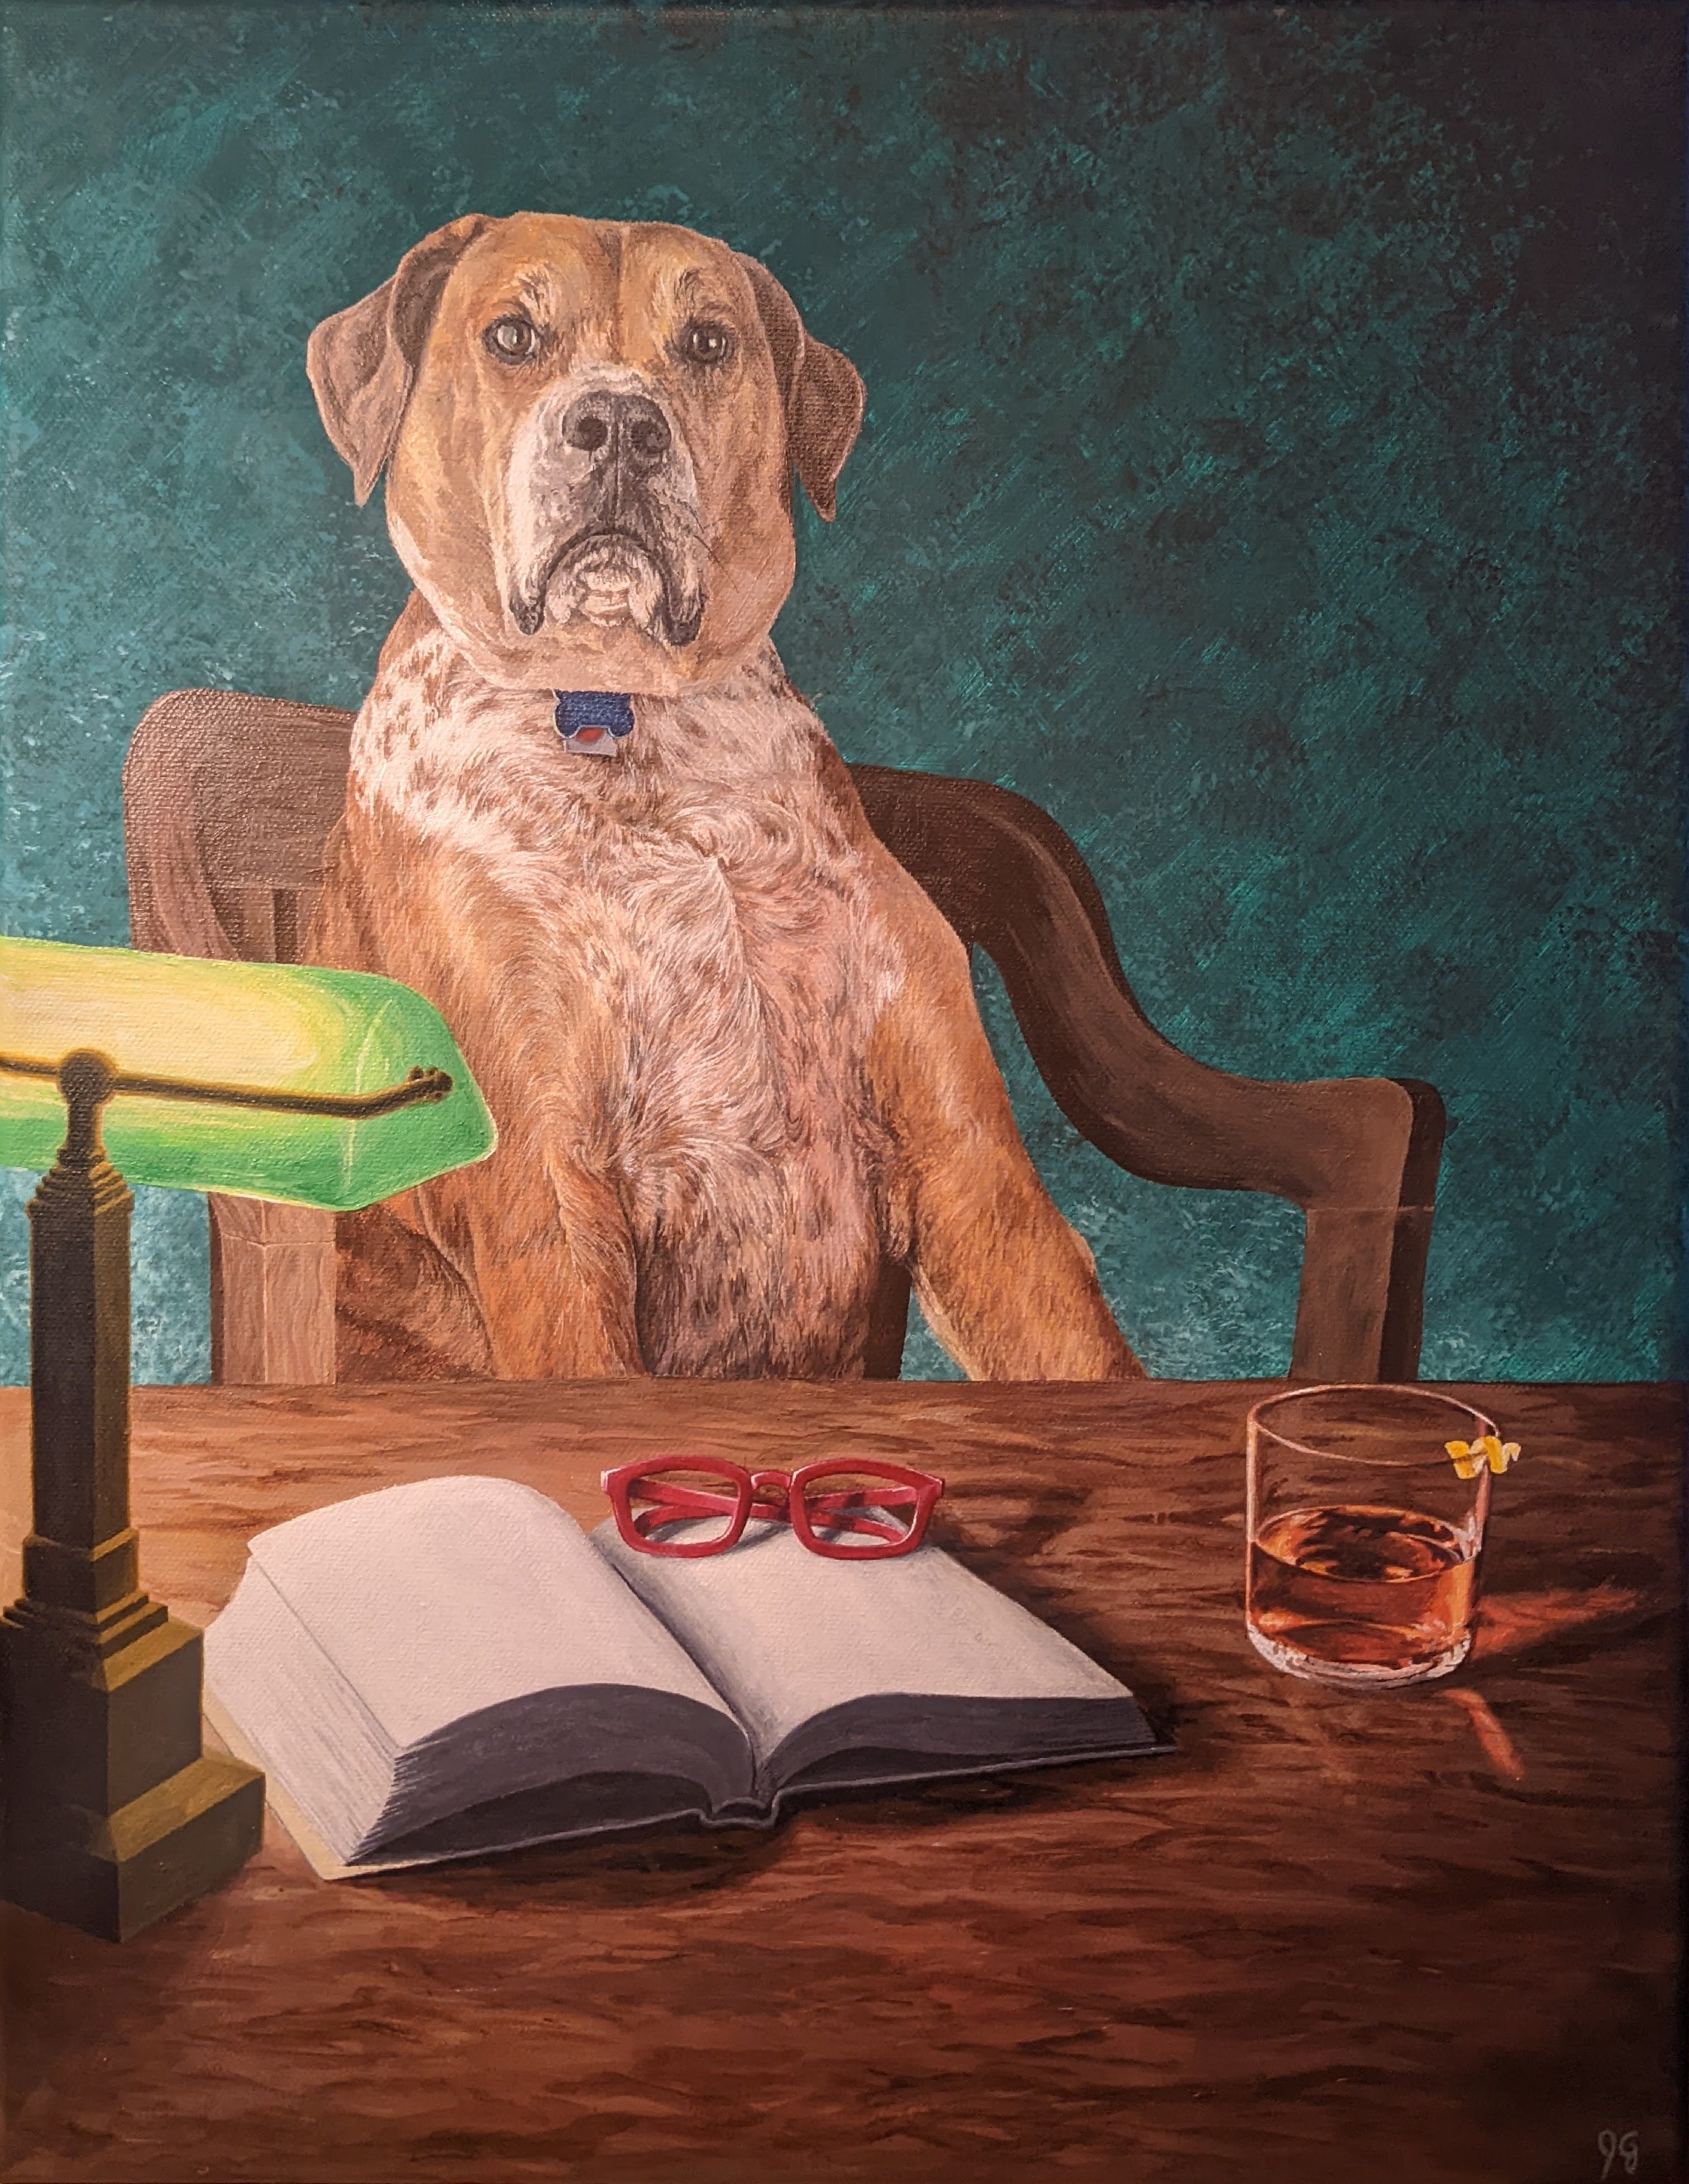 painting of dog sitting at desk with lamp, open book, reading glasses, and beverage in glass